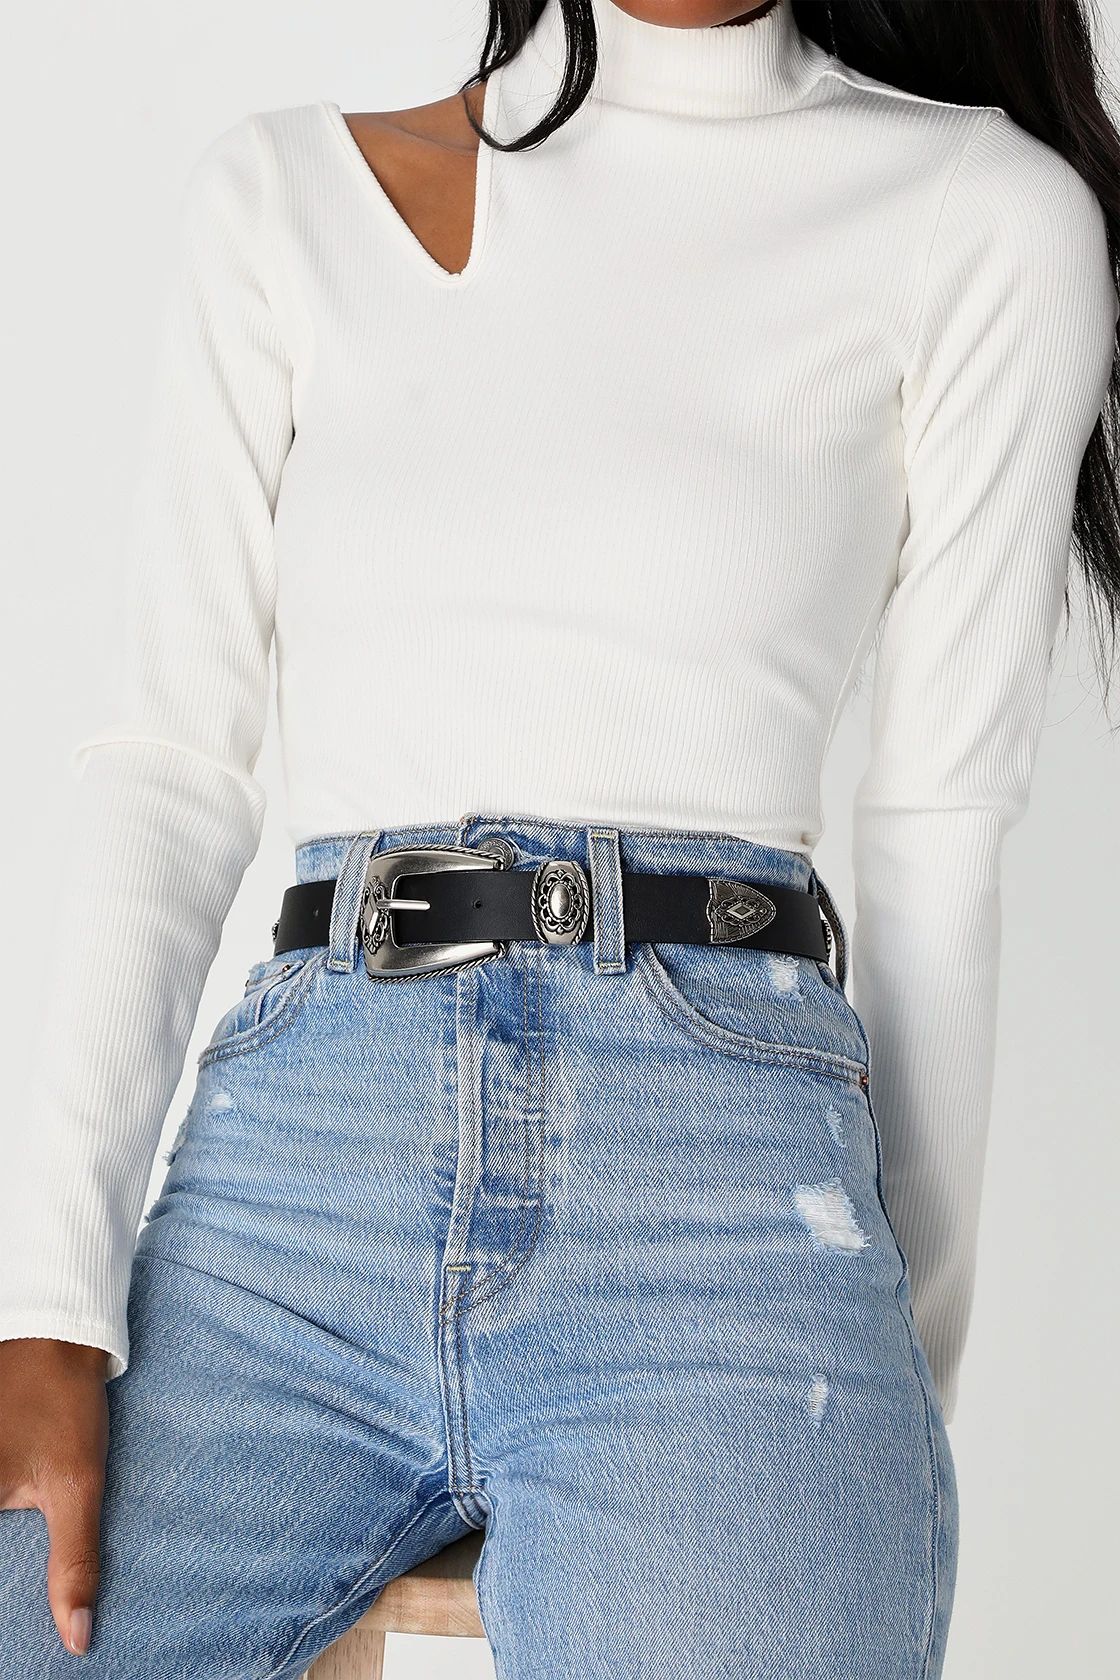 Ride On Black and Silver Belt | Lulus (US)